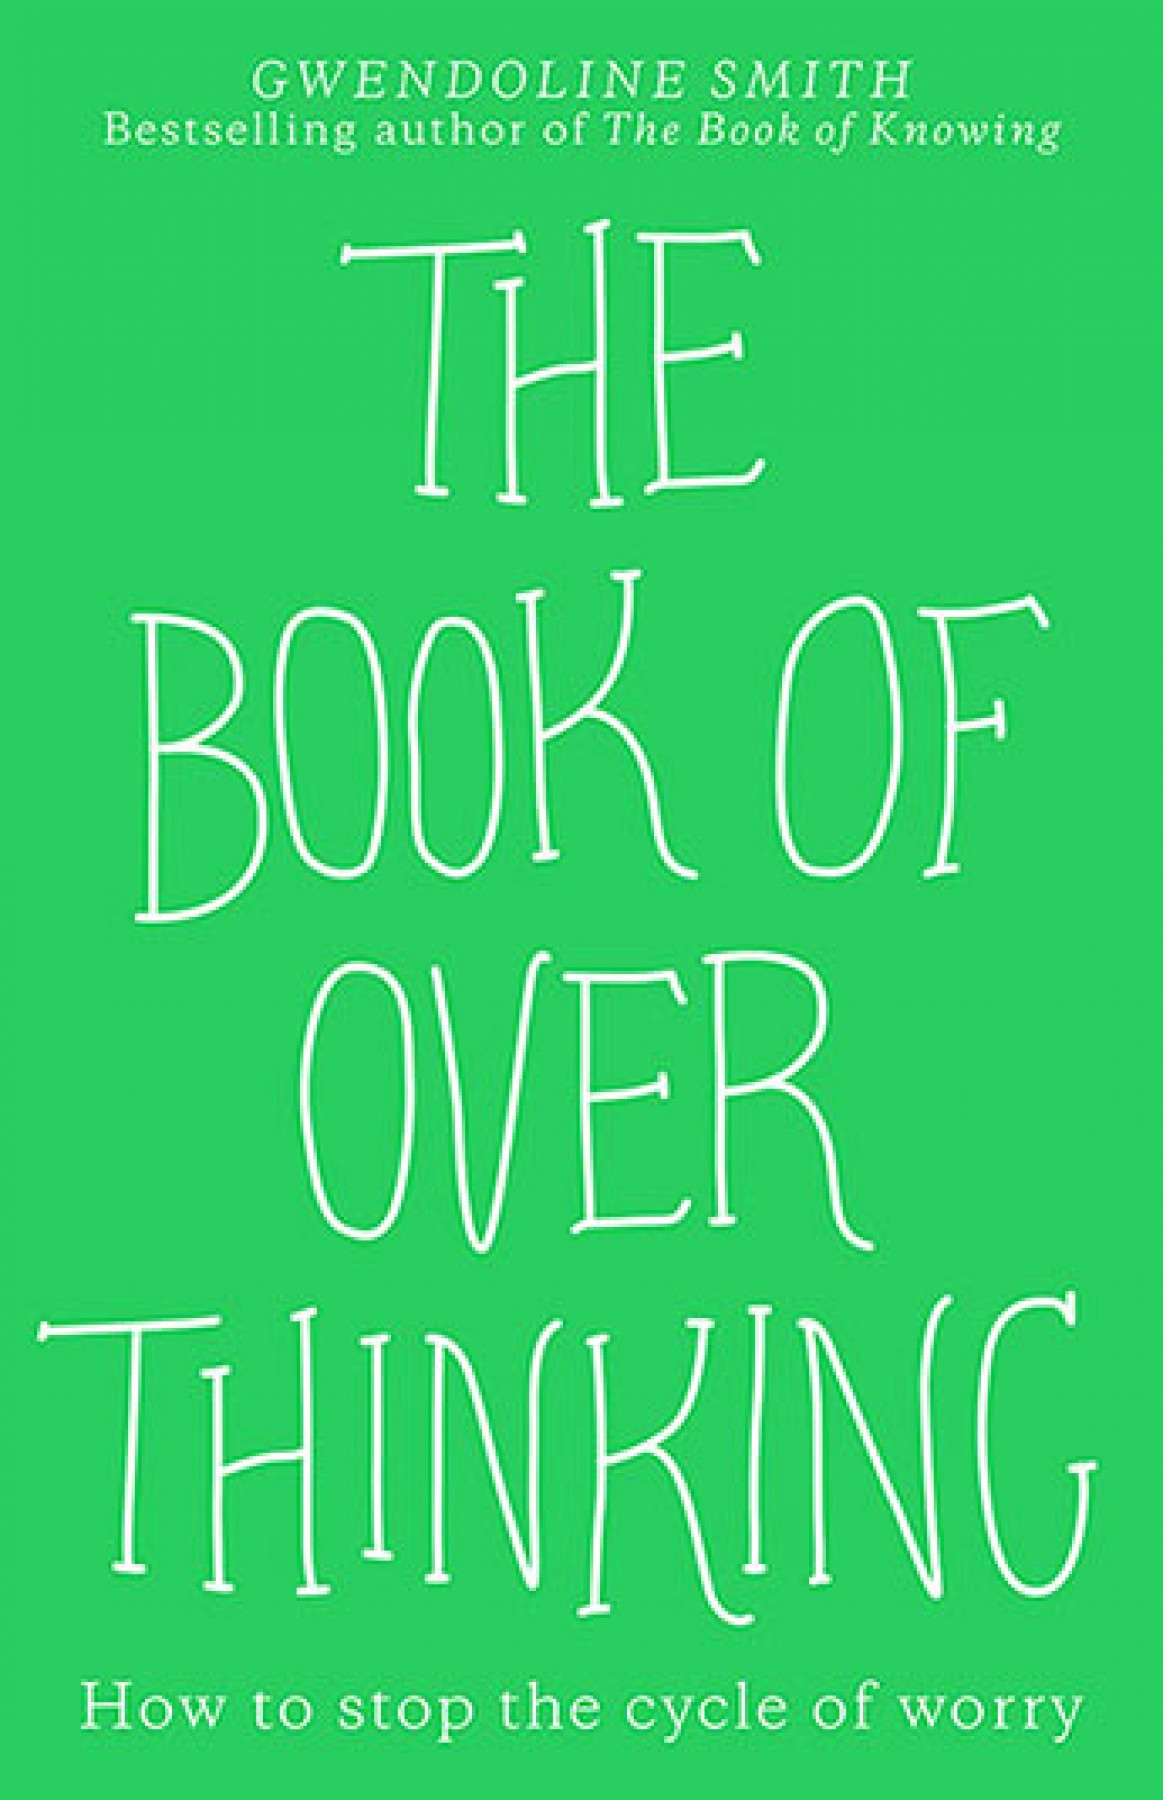 The book of overthinking: How to escape the cycle of worry